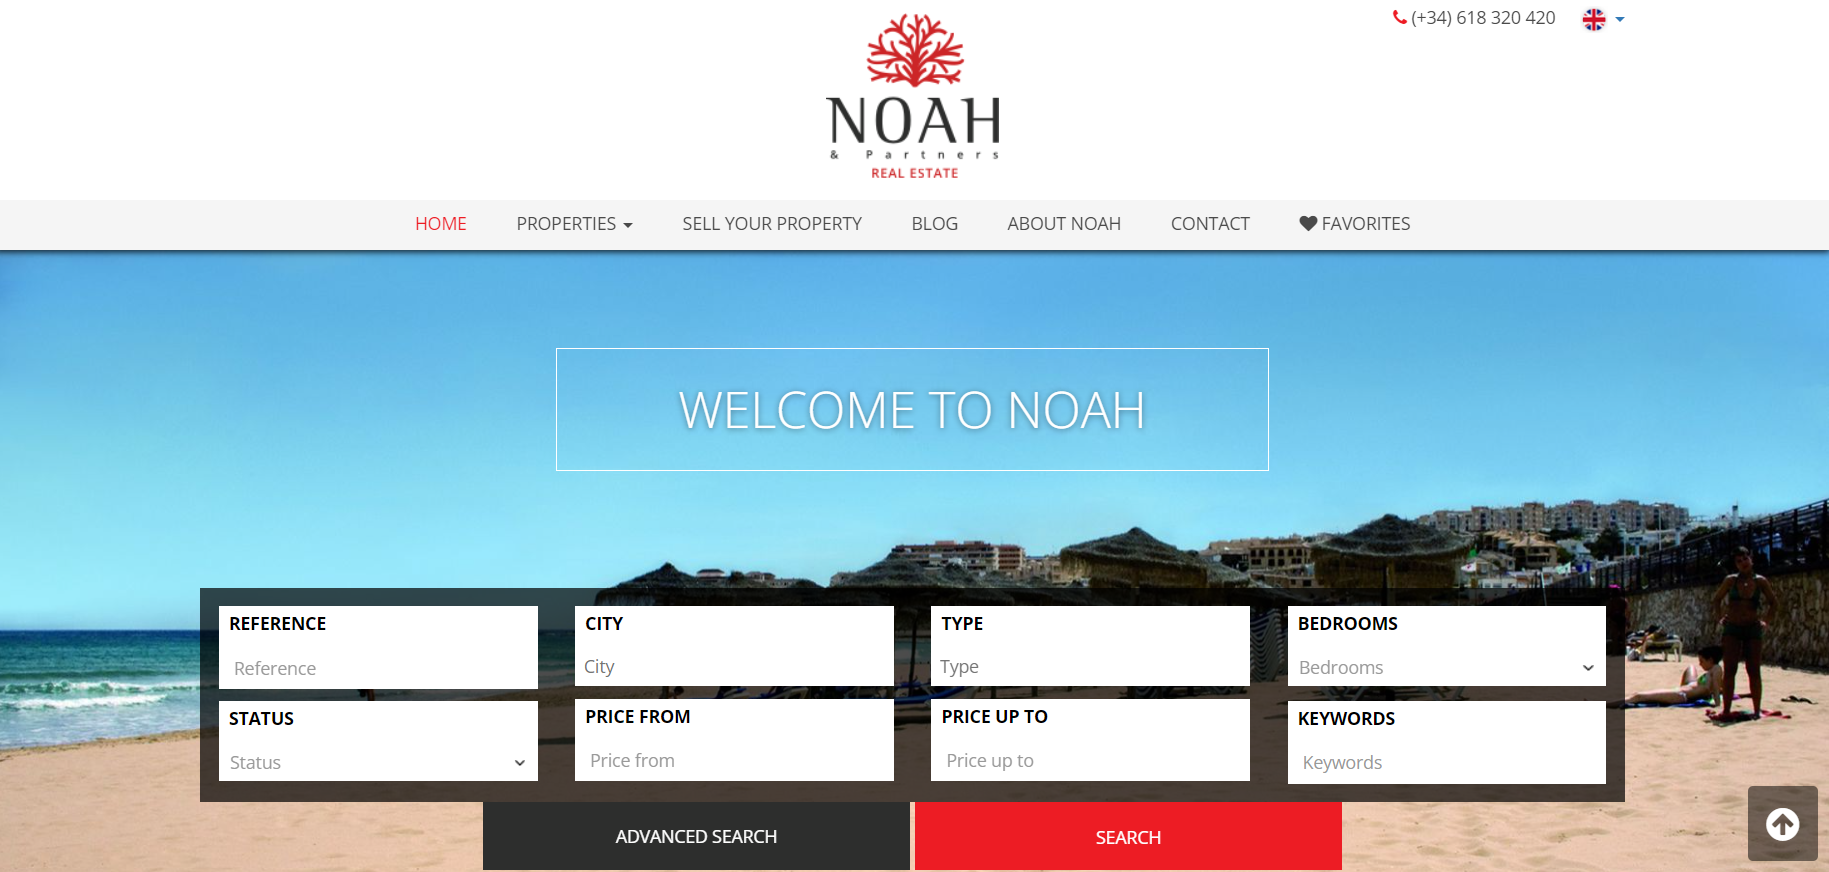 NOAH & PARTNERS REAL ESTATE: Real Estate Without Hidden Pitfalls? Understanding the Situation